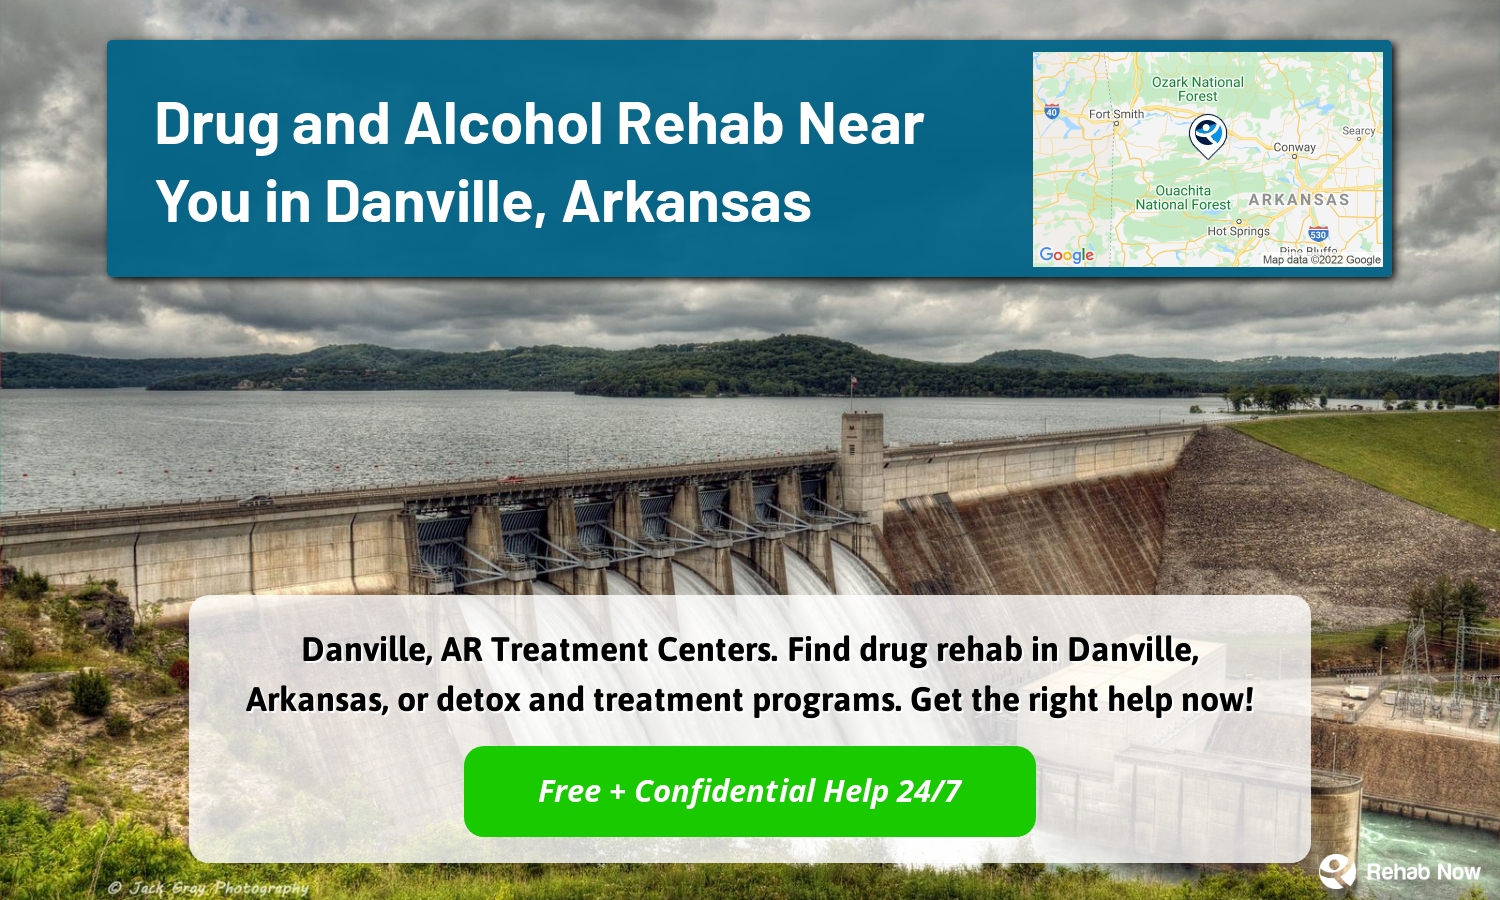 Danville, AR Treatment Centers. Find drug rehab in Danville, Arkansas, or detox and treatment programs. Get the right help now!